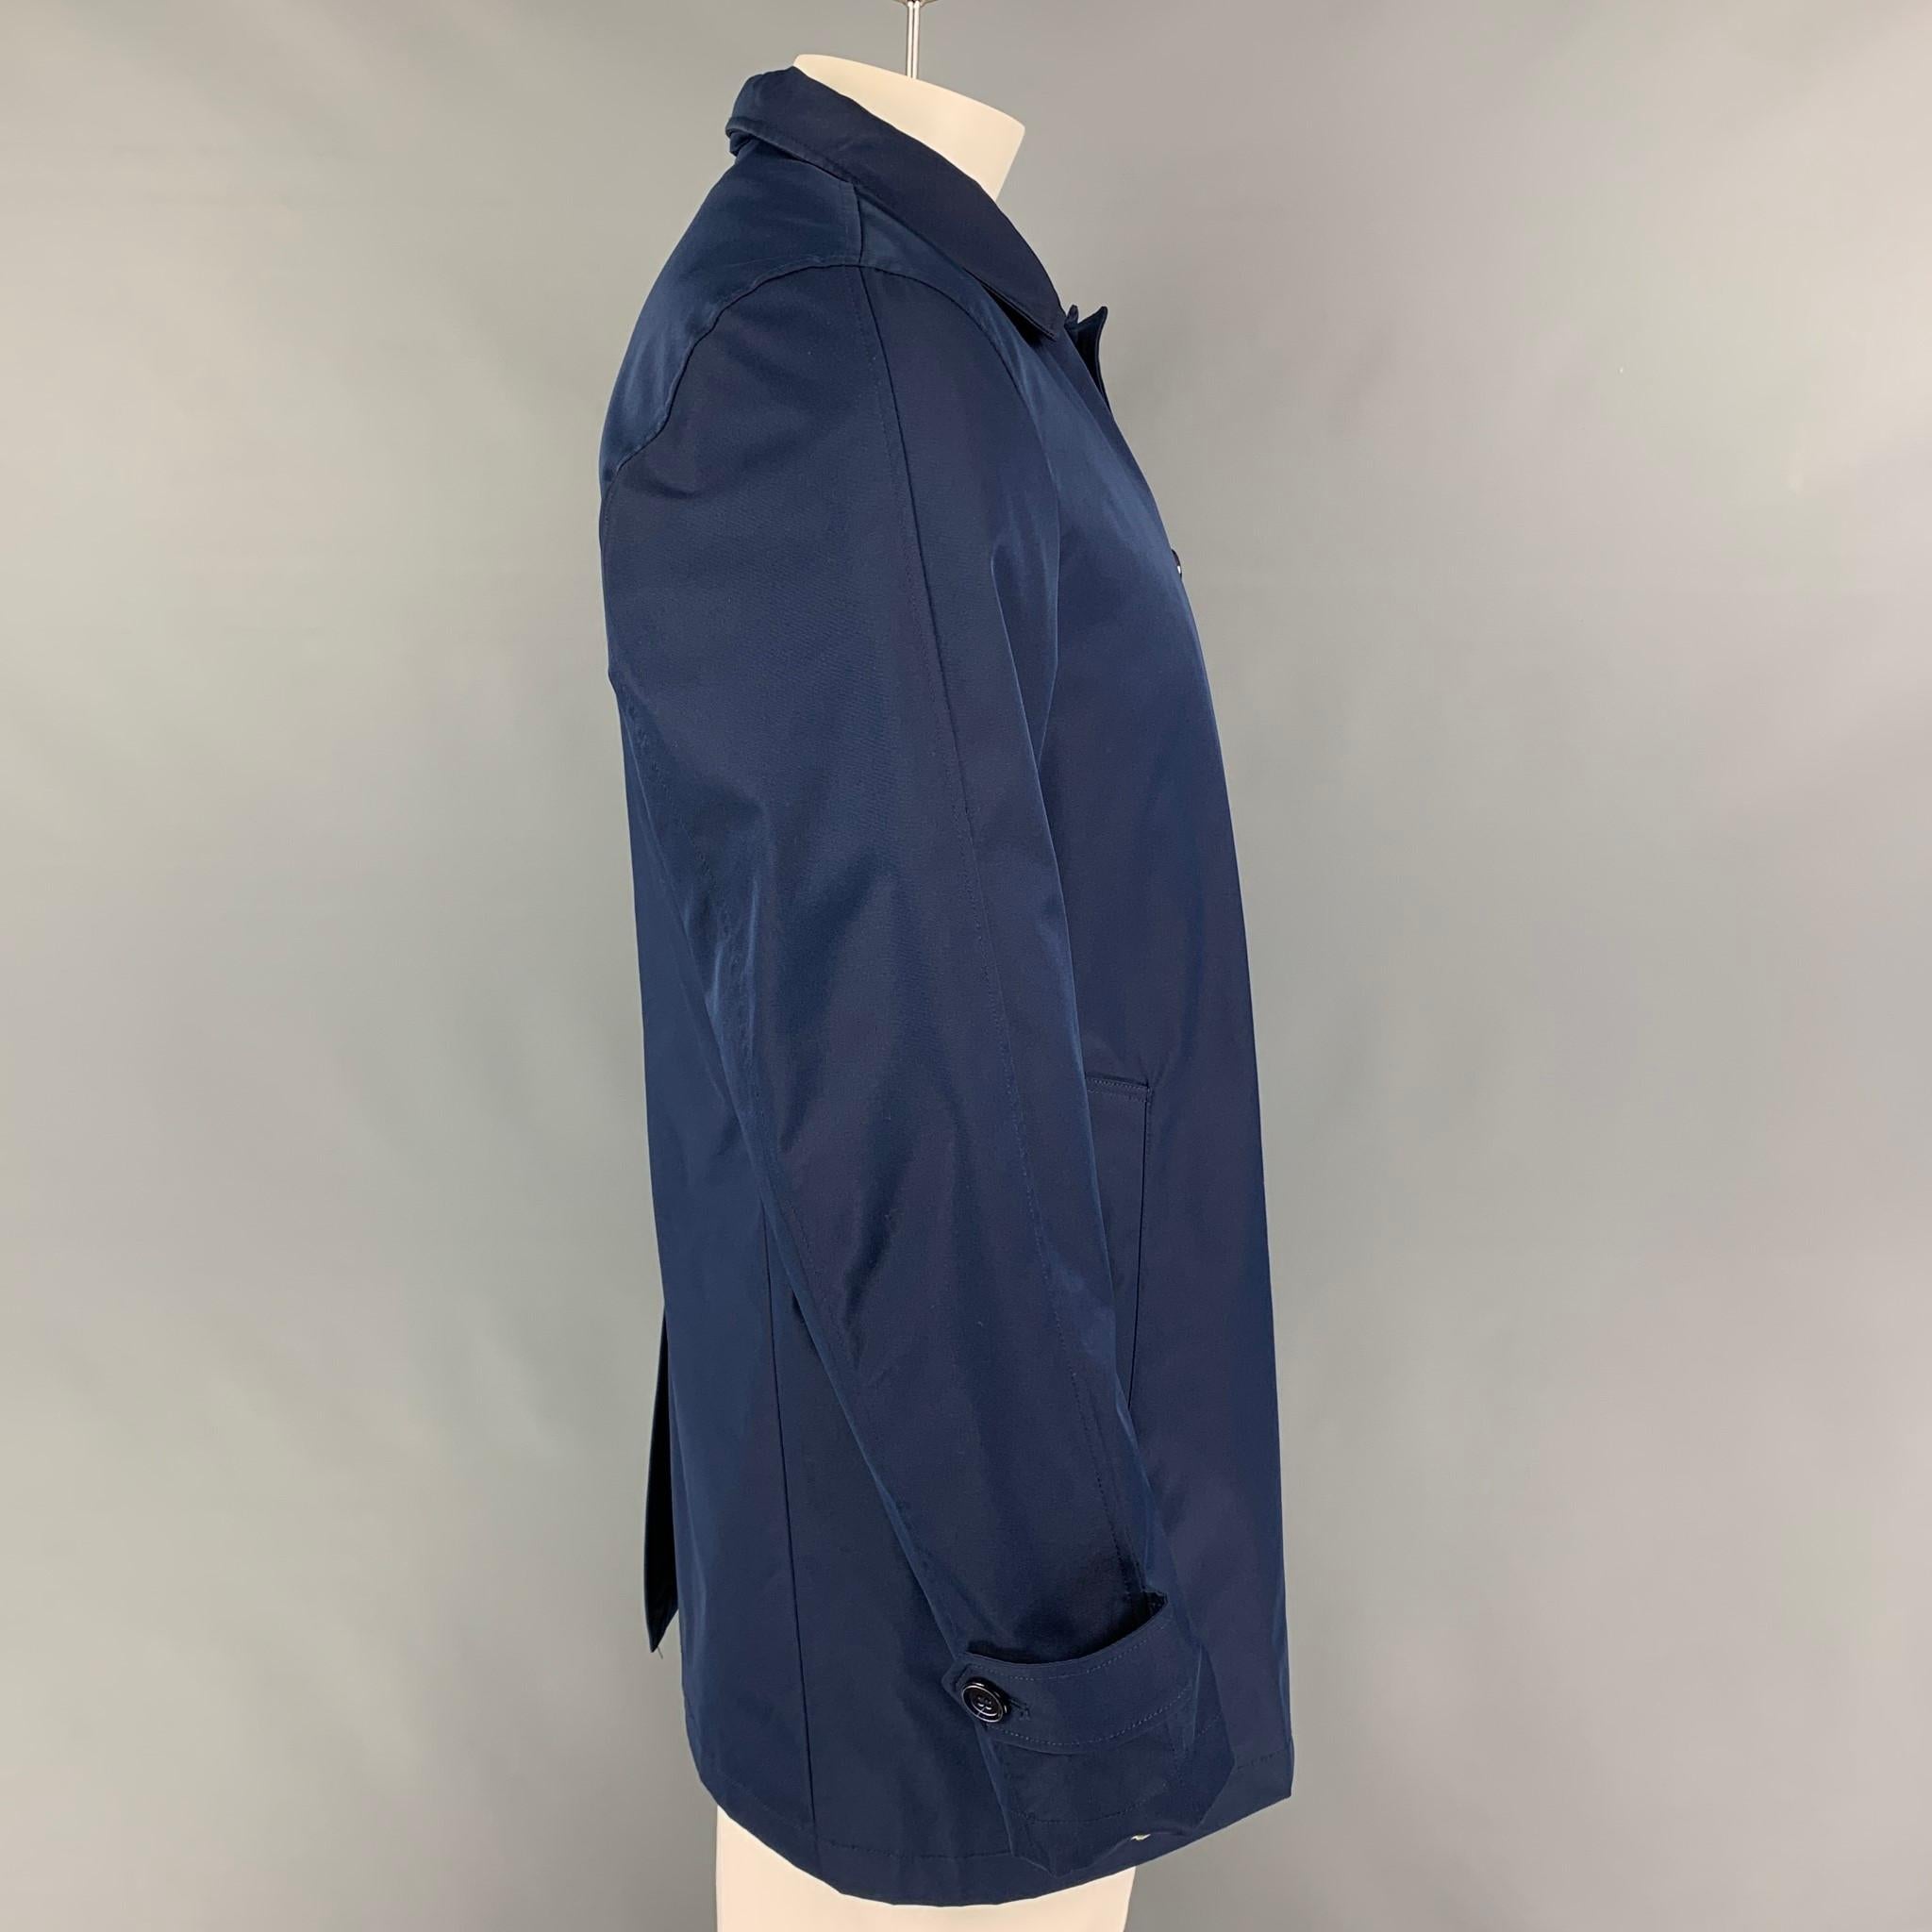 EREDI PISANO coat comes in a navy cotton with a detachable liner featuring a hooded style, slit pockets., single back vent, and a buttoned closure. 

Very Good Pre-Owned Condition.
Marked: 52

Measurements:

Shoulder: 18.5 in.
Chest: 44 in.
Sleeve: